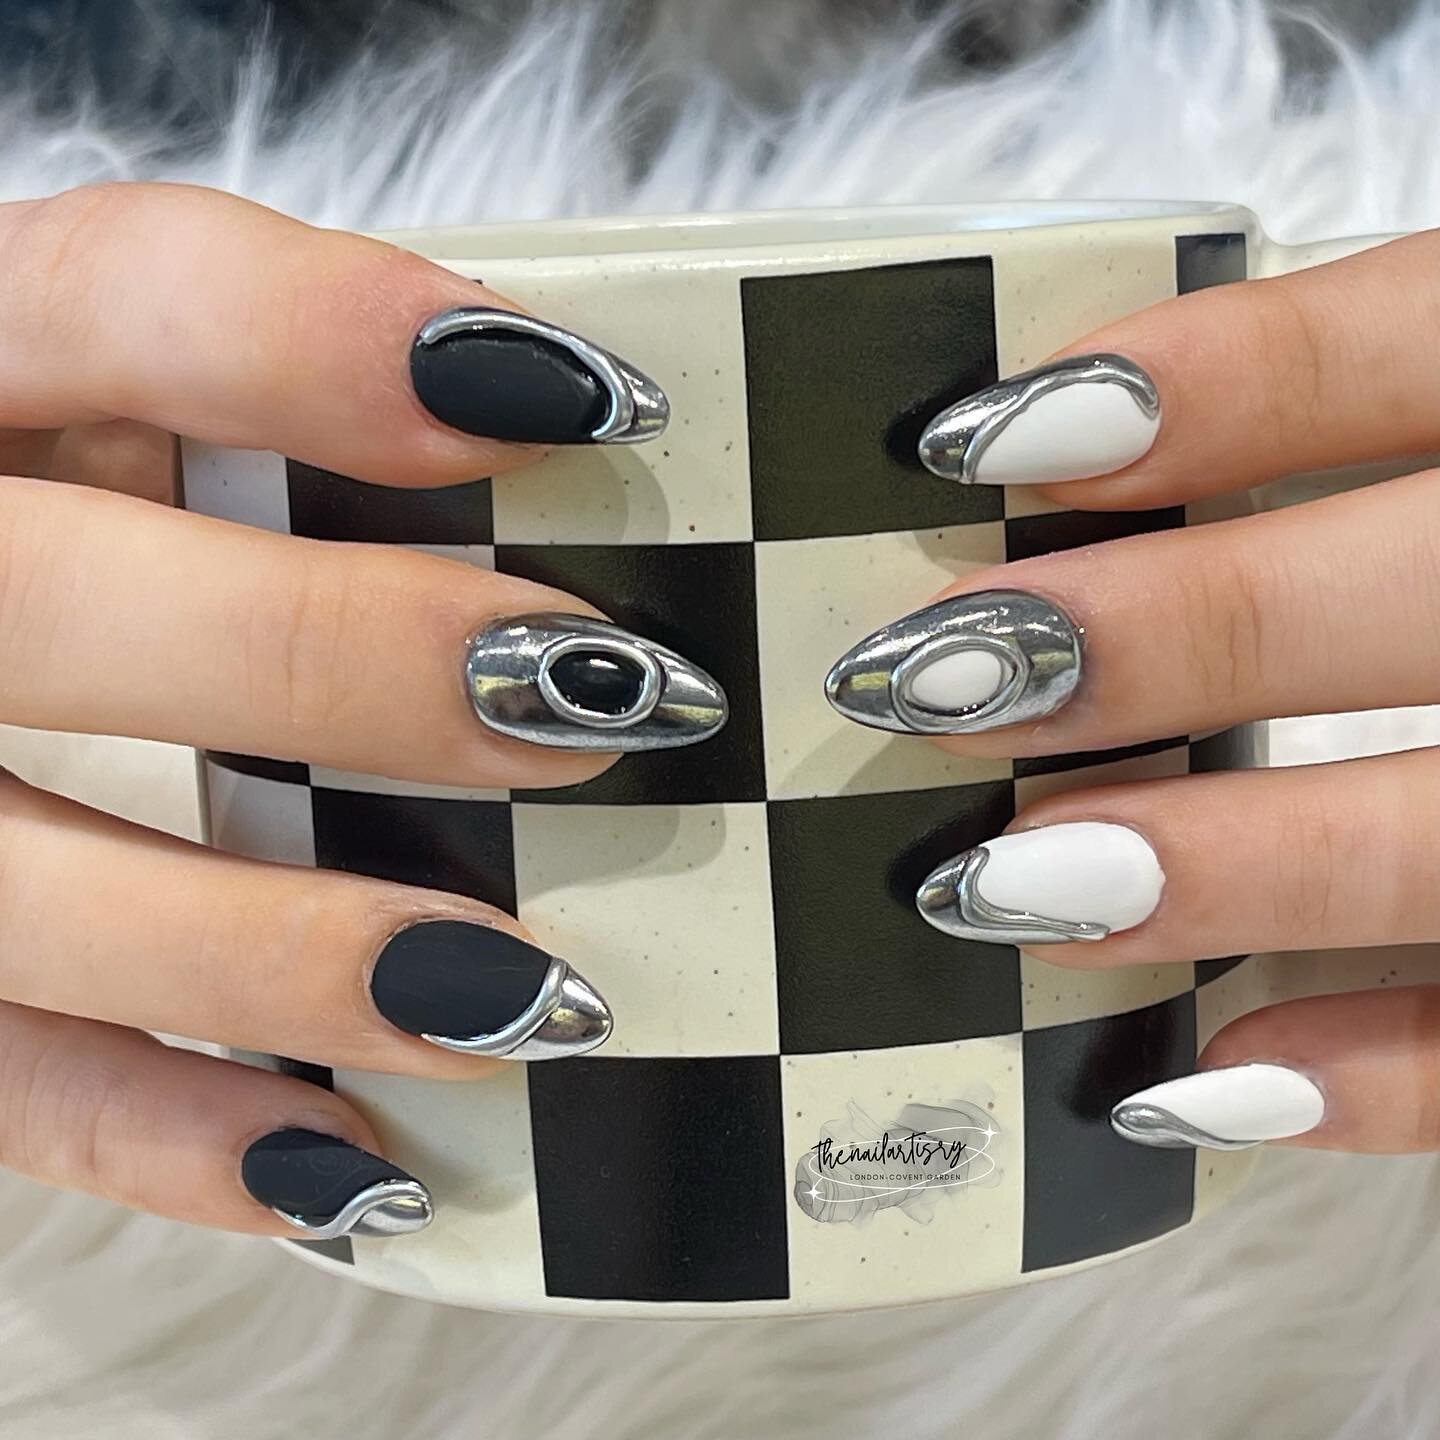 🖤⛓Follow the Hype- 𝟑𝐃 𝐍𝐚𝐢𝐥𝐬 𝐀𝐫𝐭𝐬 is everything right now 🖤🤍

👀 What do ya think of this style? We can create different type of 3D Nails Art 📲 Head to our bio and book your appointment with us
❤️&zwj;🔥 We are based in Covent Garden Lo